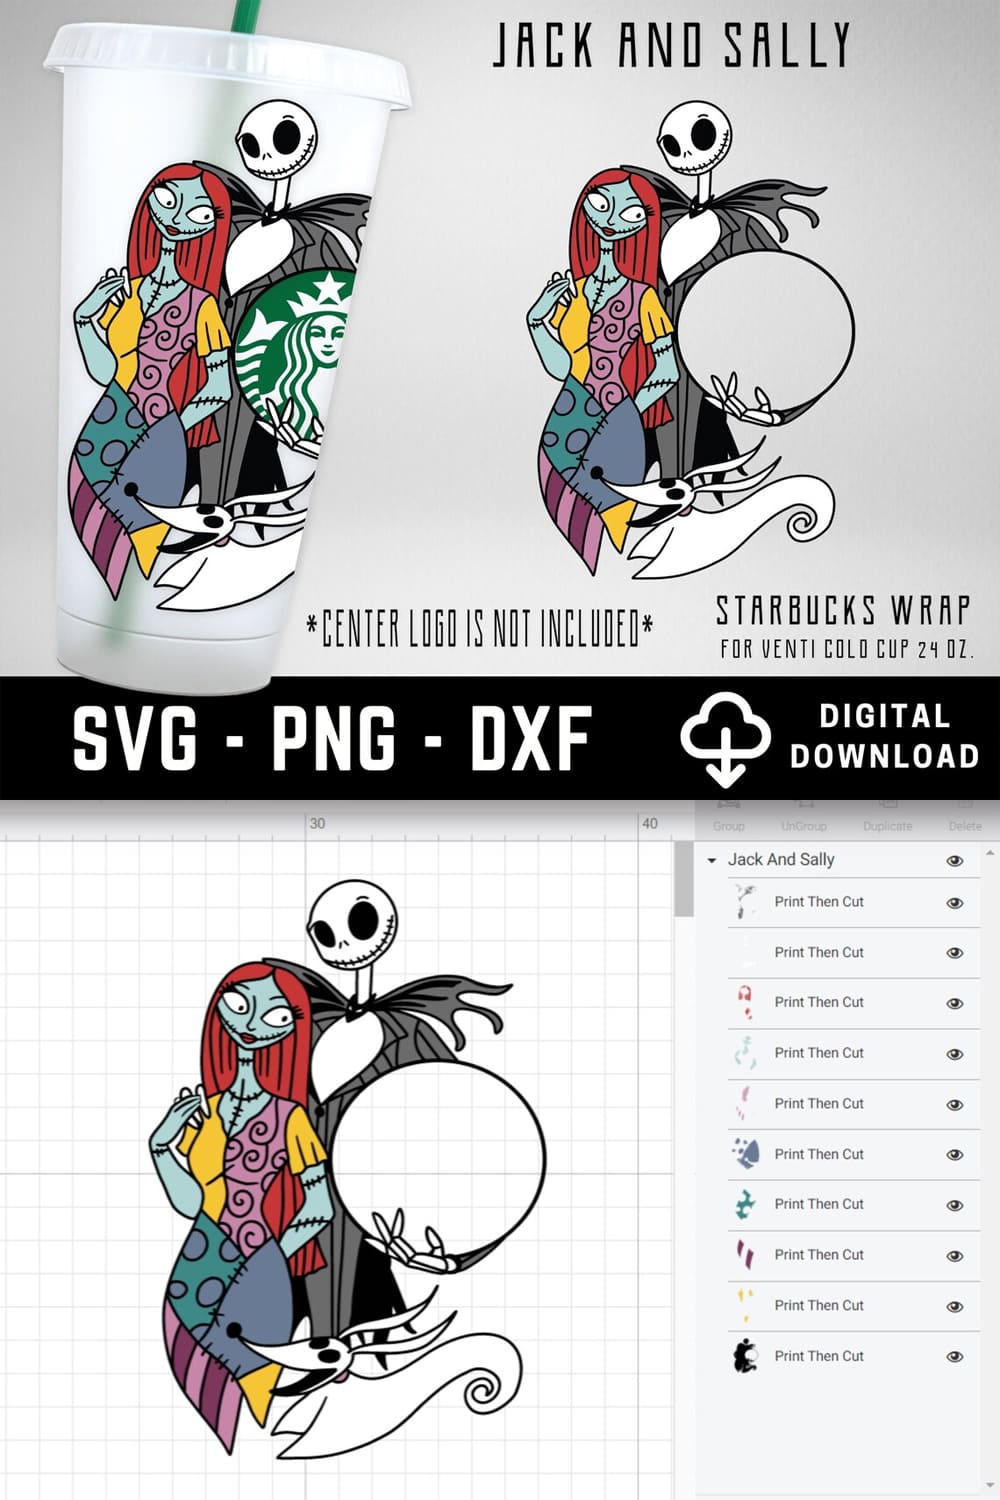 Jack And Sally SVG Starbucks Cold Cup pinterest image.